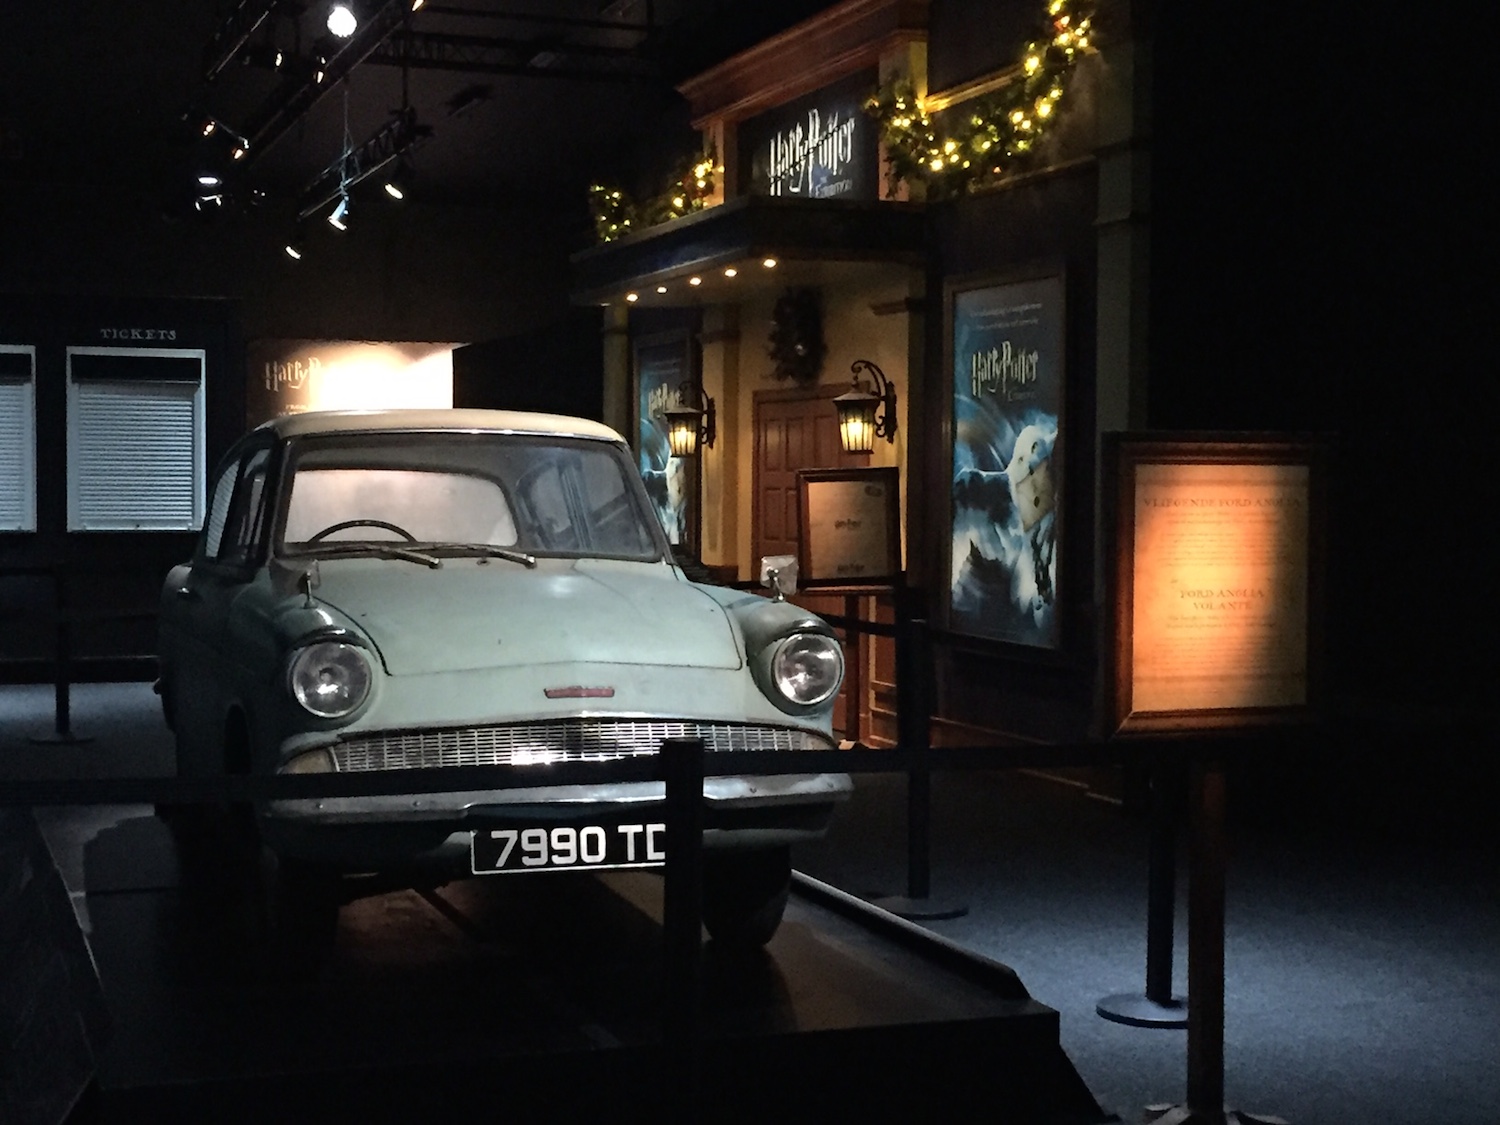 The Ford Anglia from “Harry Potter and the Chamber of Secrets”